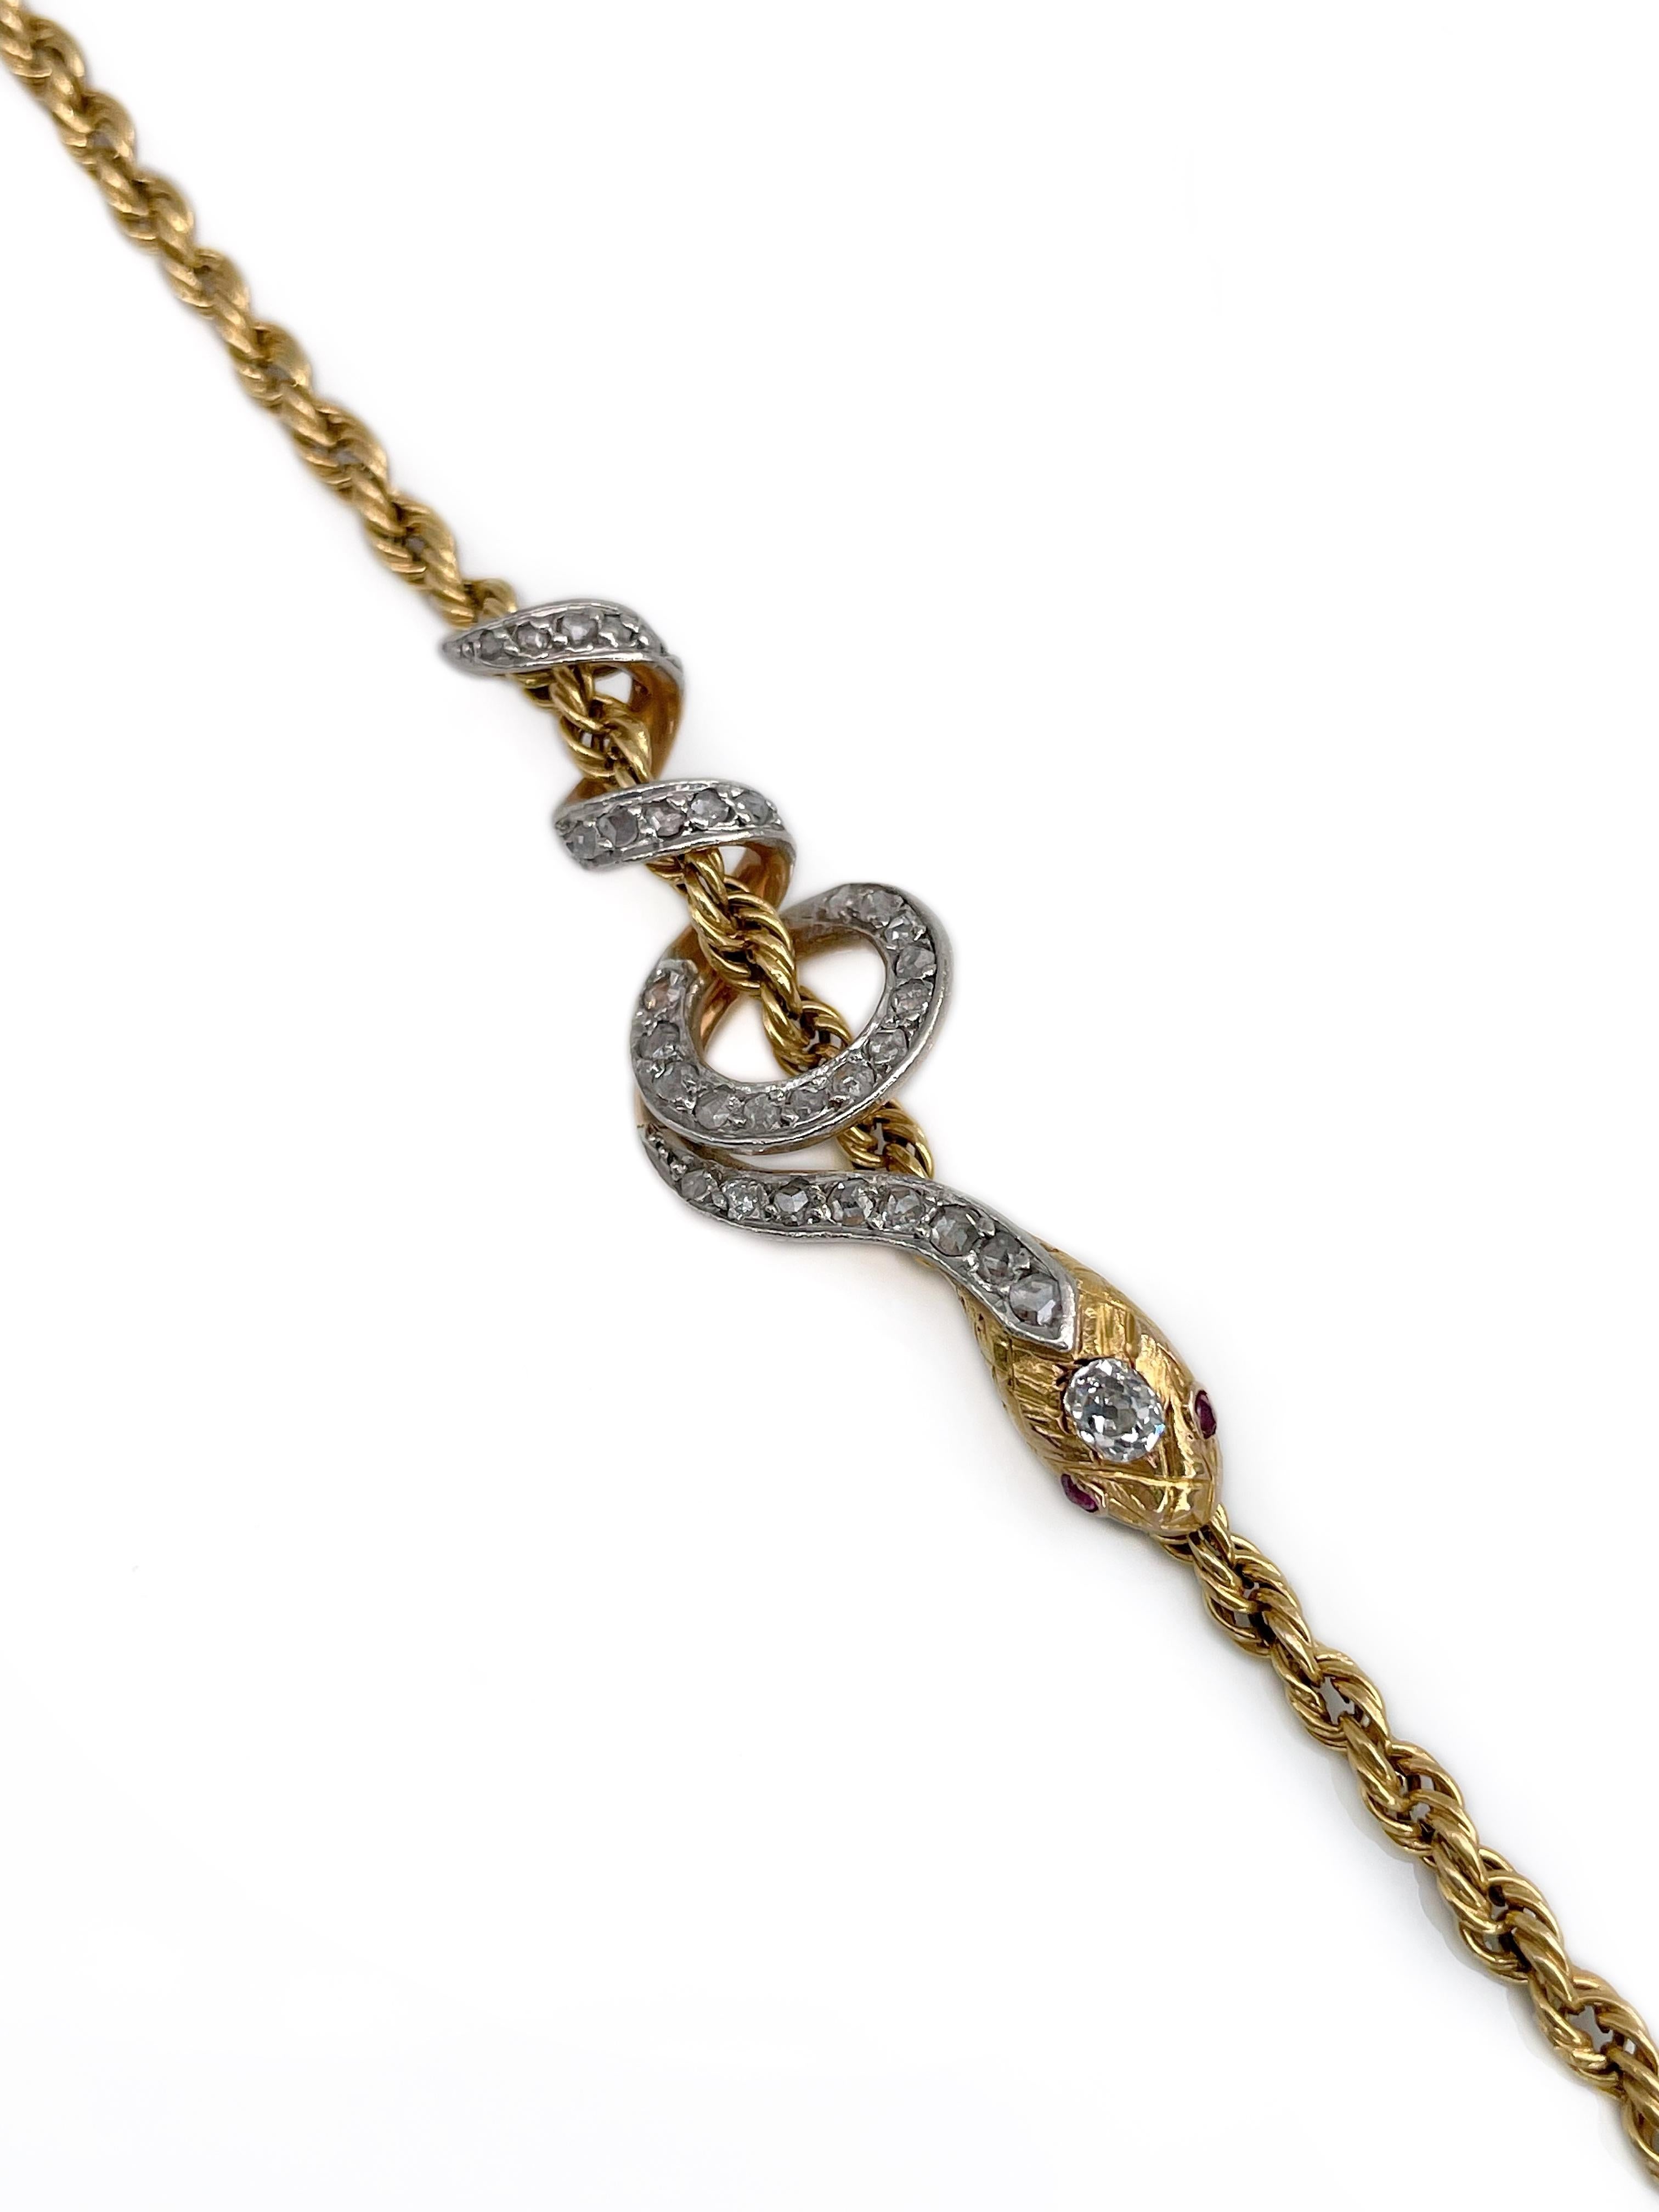 It is a Victorian snake slider pendant with a chain crafted in 18K yellow gold. Circa 1890. 

The piece features rubies, old mine and rose cut diamonds.

Weight: 10.87g
Pendant length: 4cm
Chain length: 51cm

———

If you have any questions, please